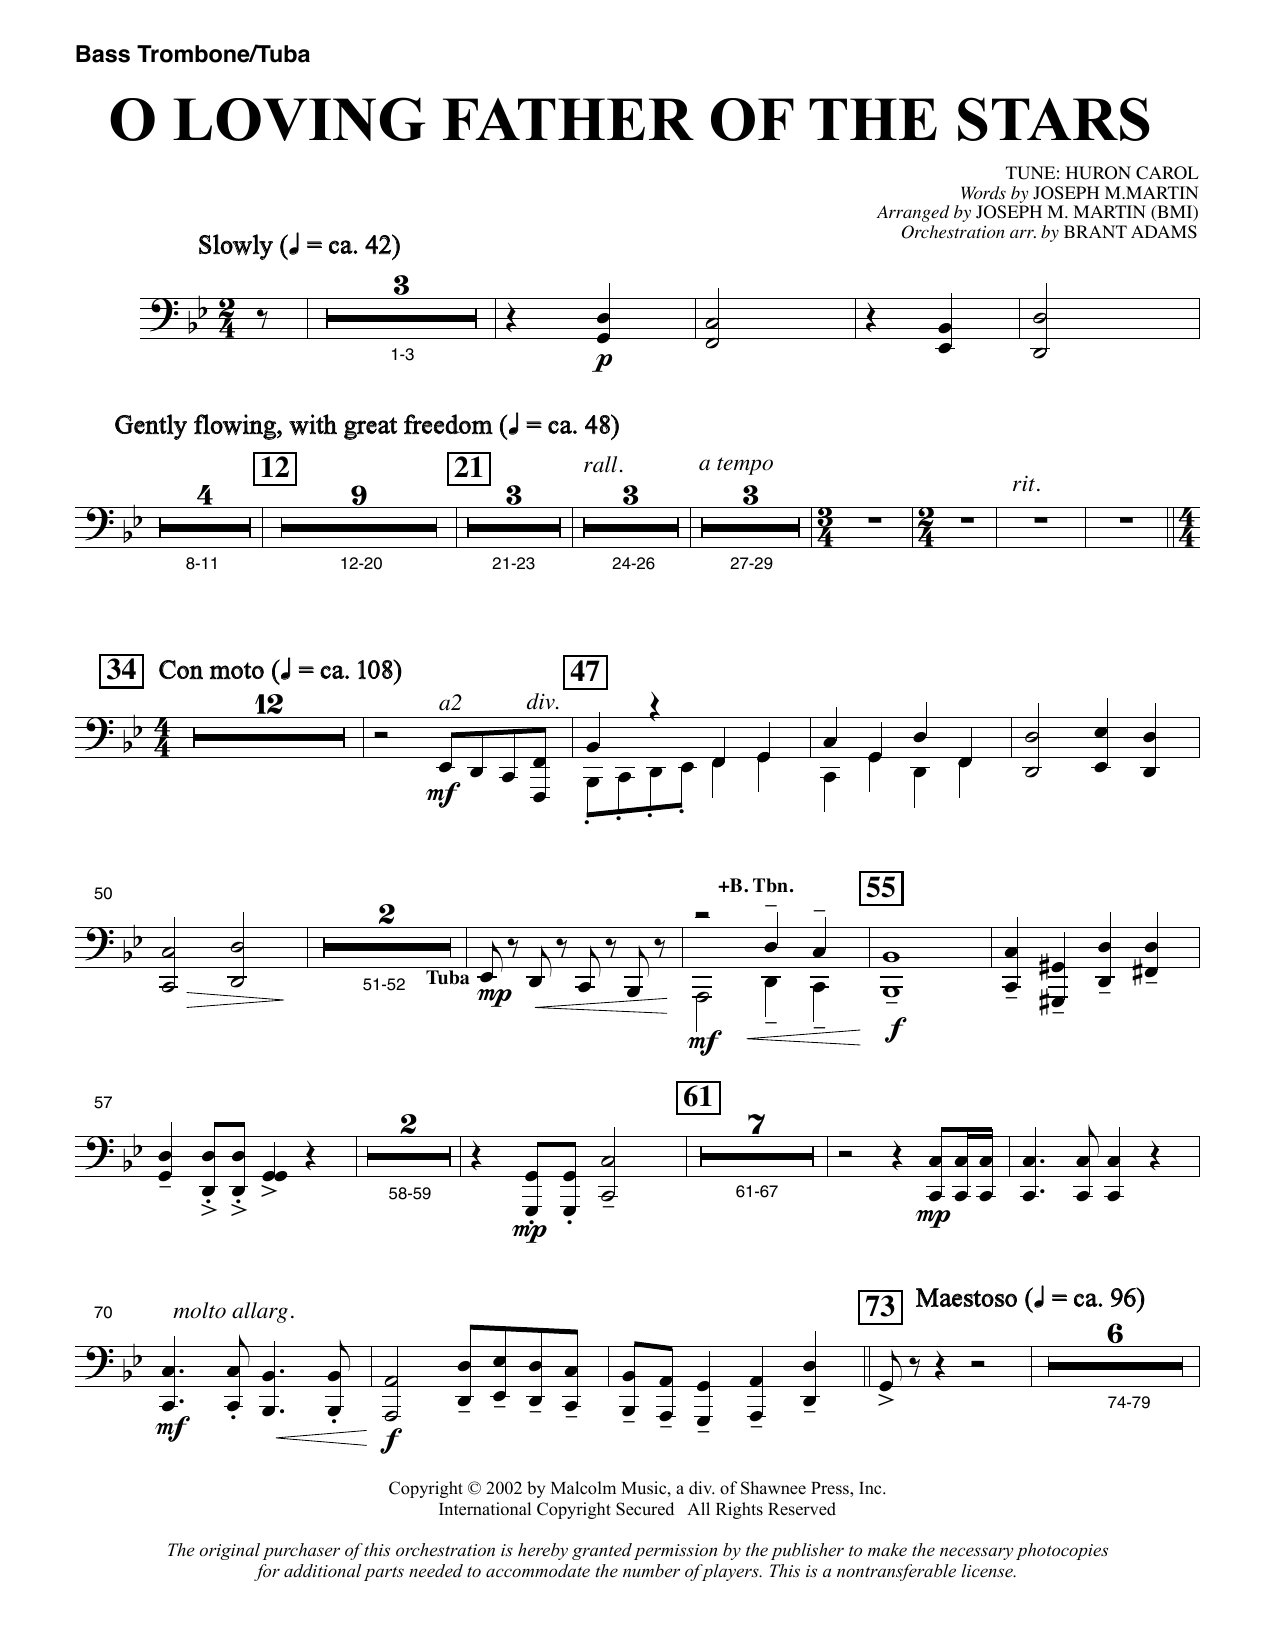 Joseph M. Martin O Loving Father Of The Stars (from Morning Star) - Bass Trombone/Tuba sheet music notes and chords. Download Printable PDF.